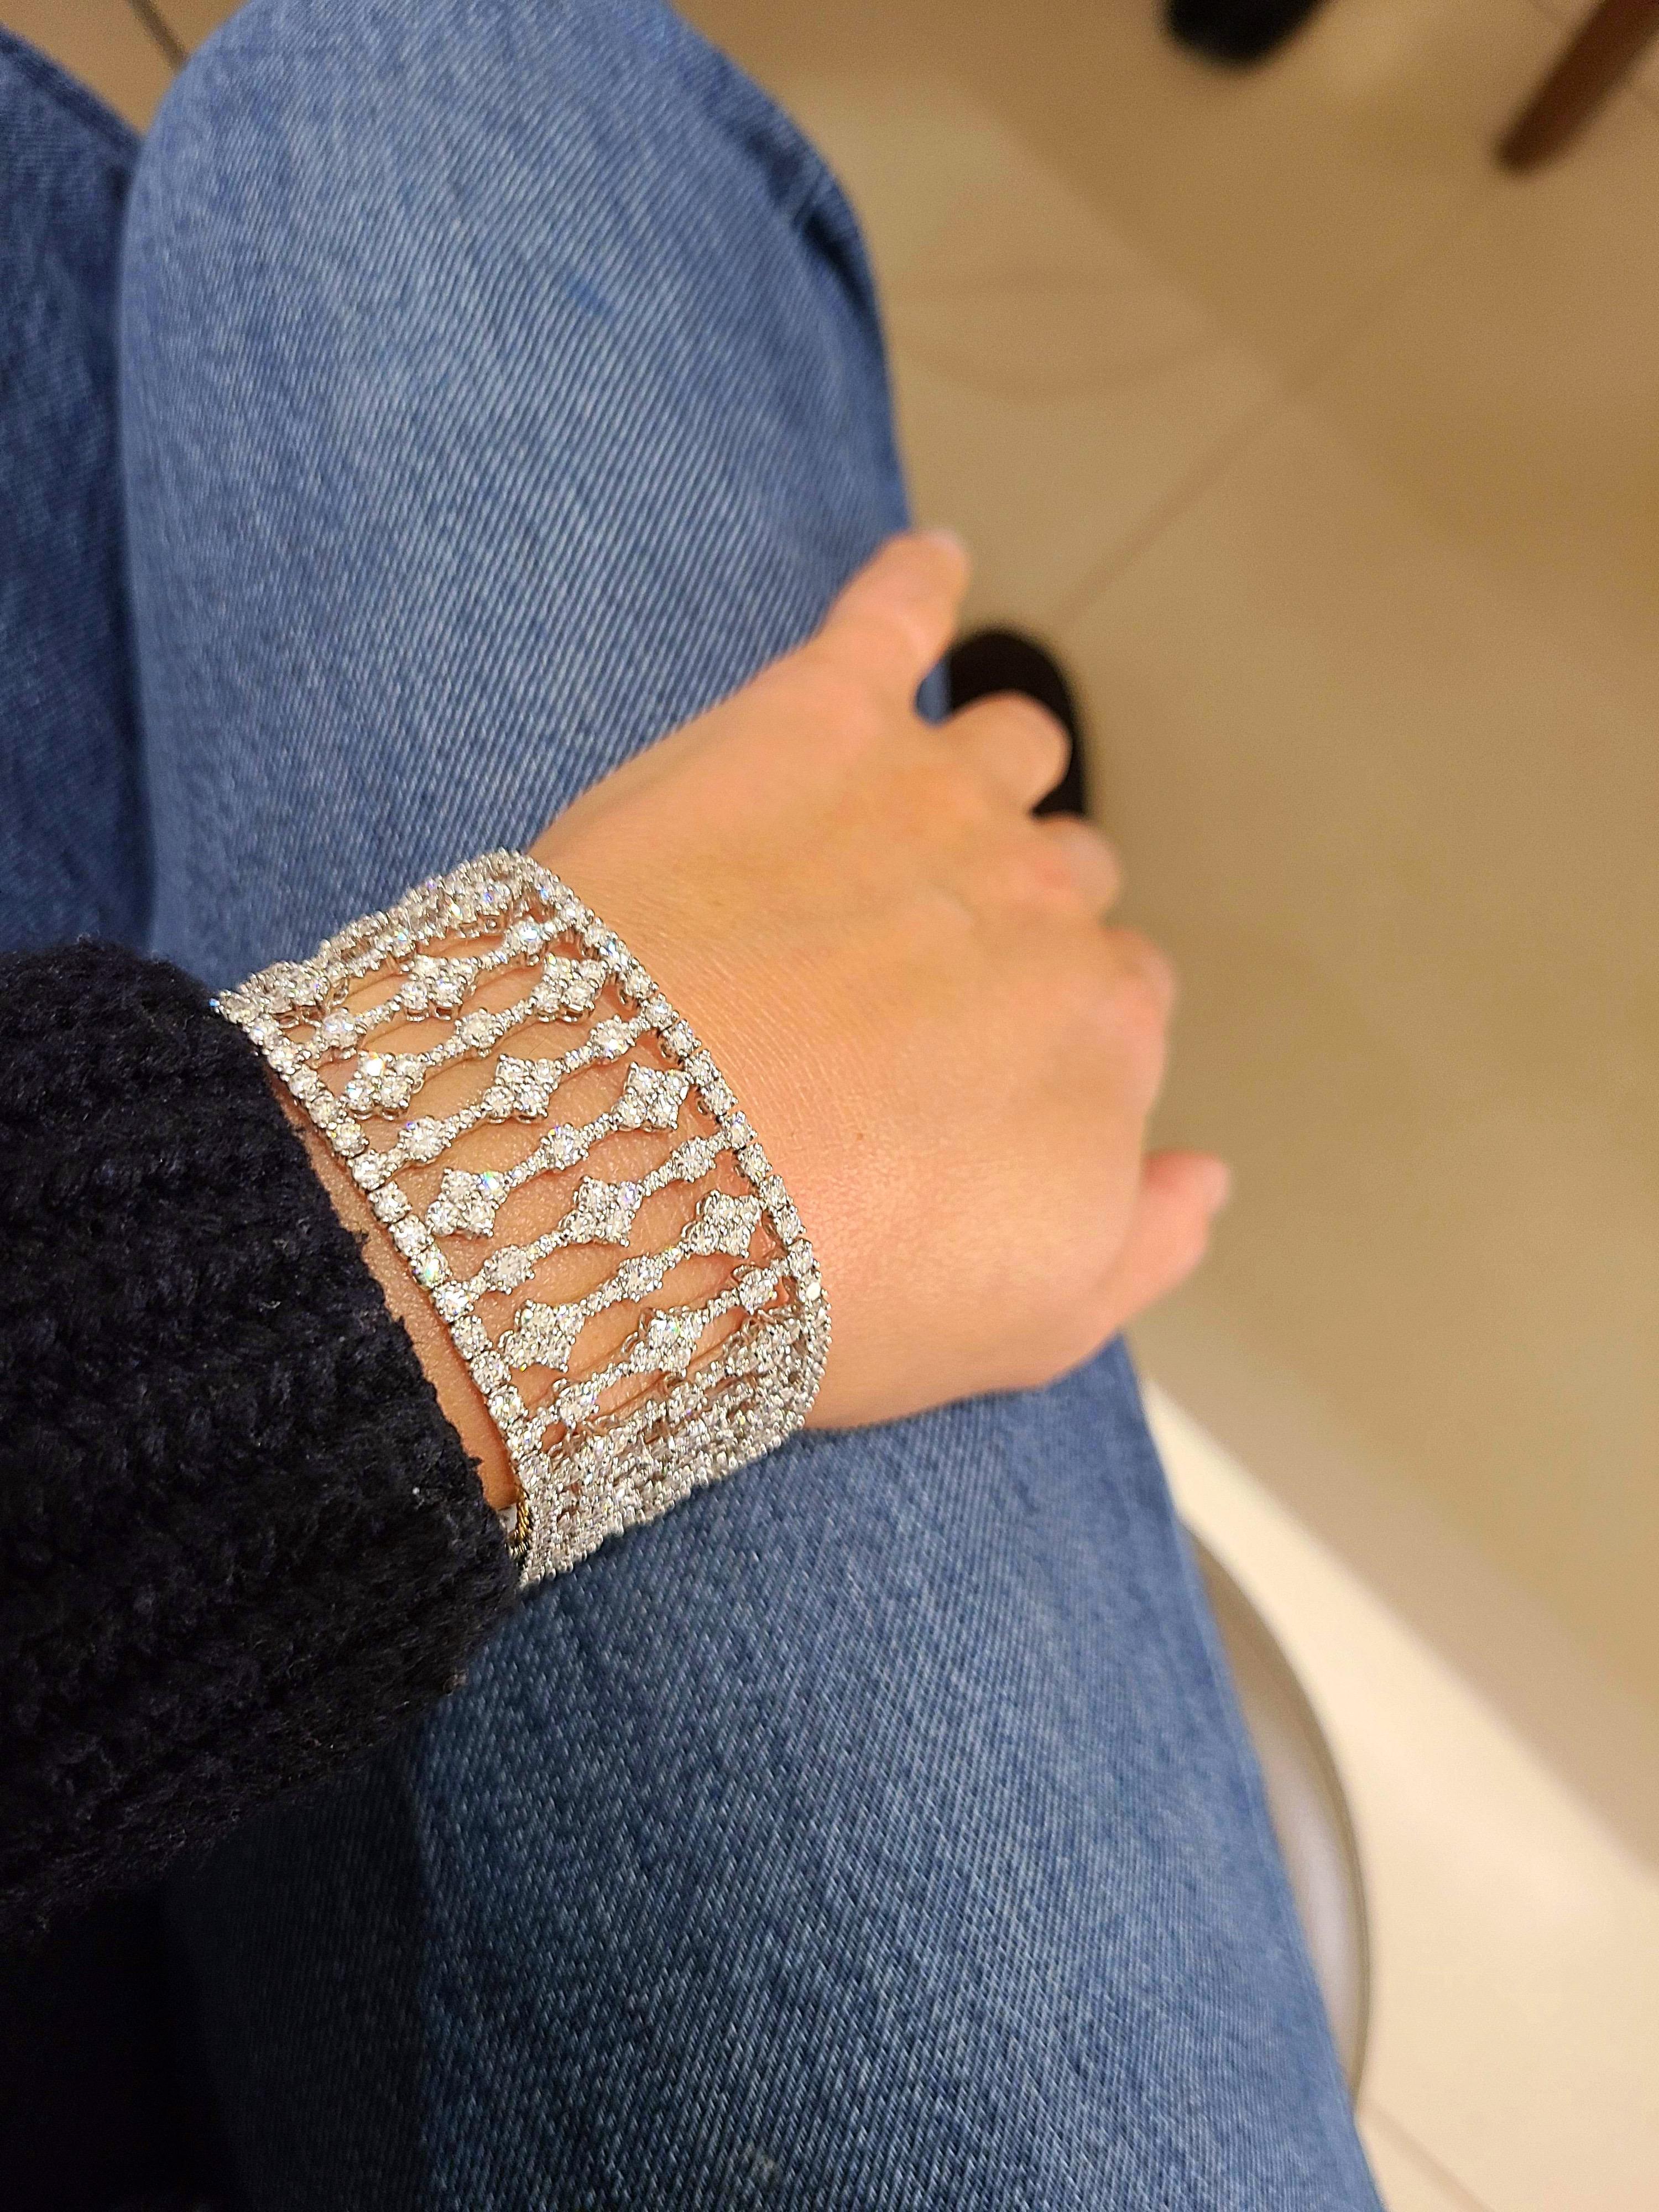 This stunning openwork bracelet is composed of 27.80 carats of round brilliant diamonds. The wide diamond bracelet is set with sections of diamonds in an elegant pattern that floats beautifully on the wrist as a cuff bracelet. The bracelet is 1.25